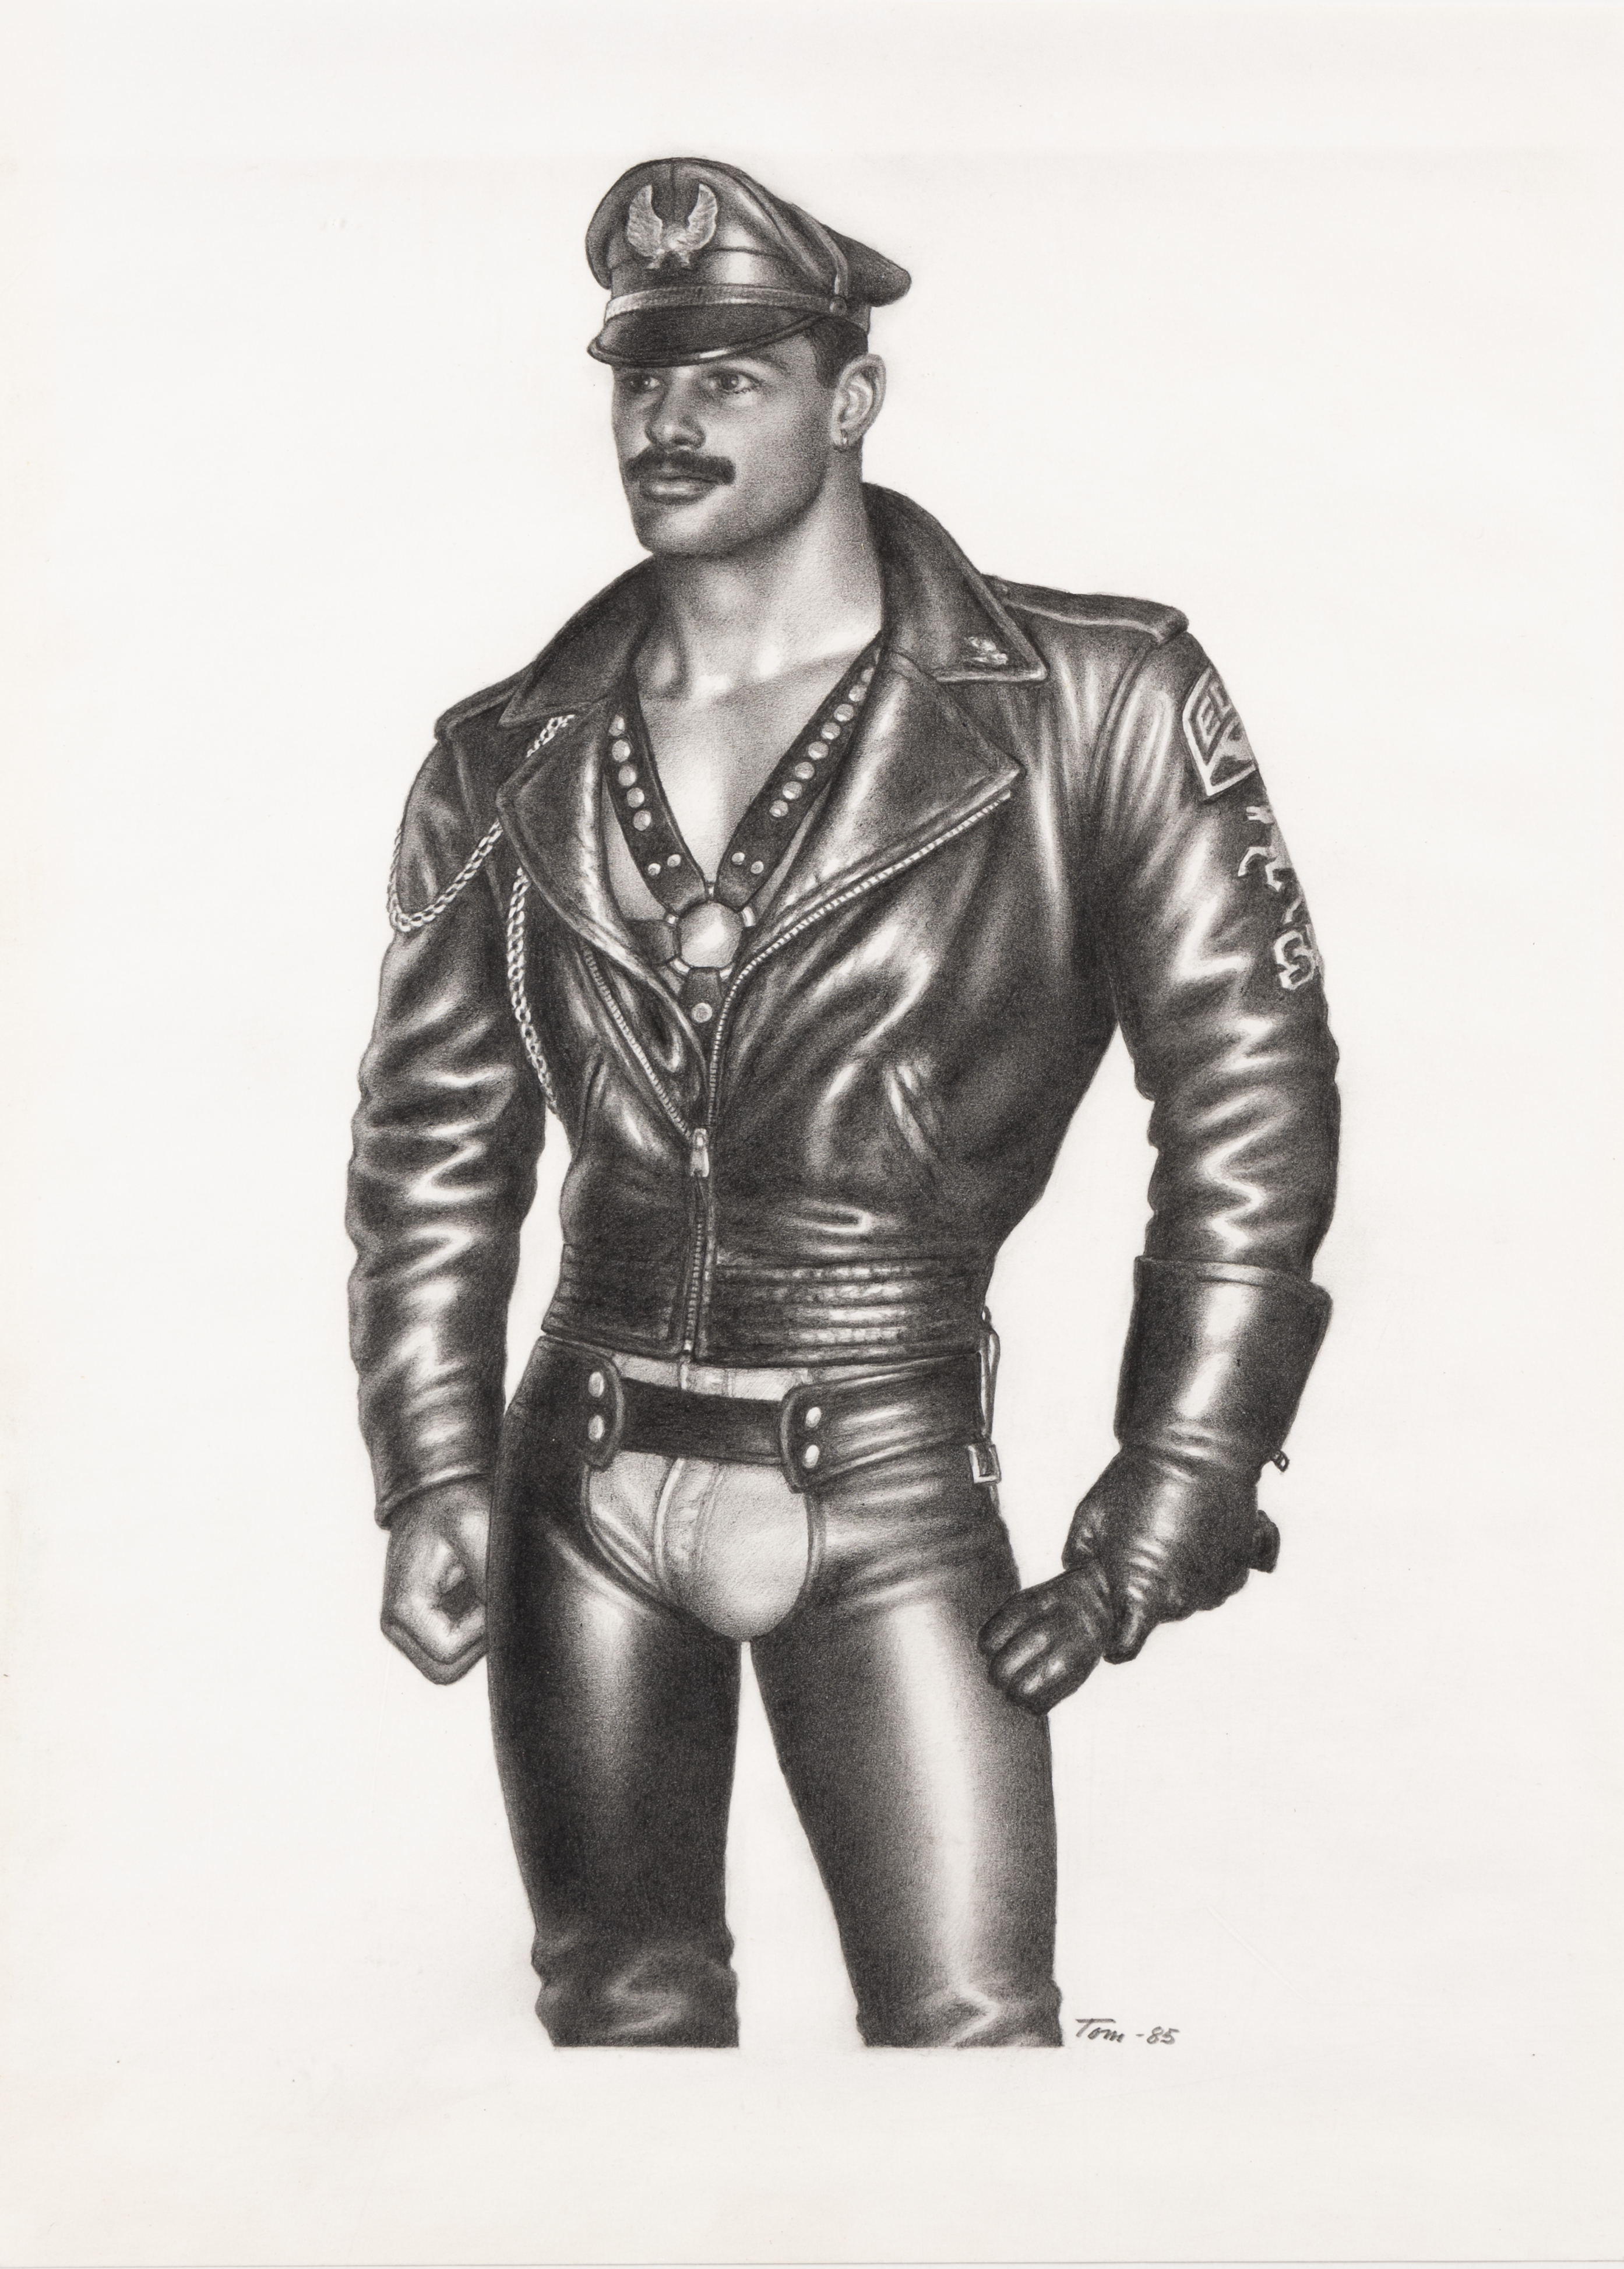 Tom of Finland, ‘Portrait of Eric,’ offered with two autograph letters, est. $20,000-$30,000